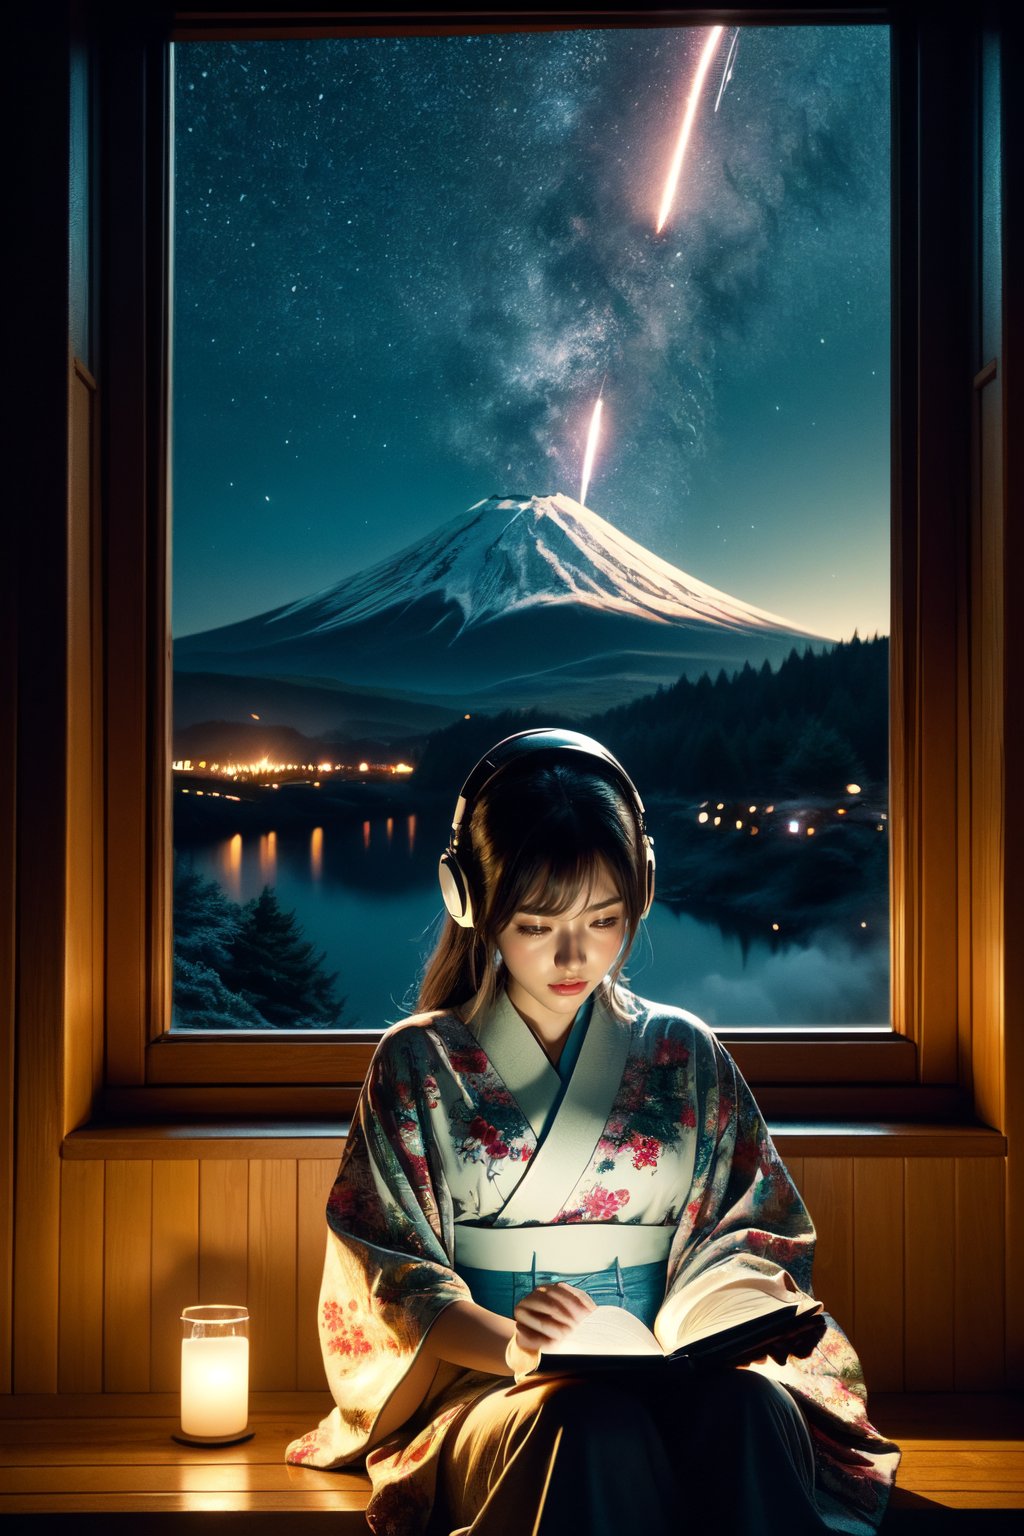 A cute LOFI music themed anime-style girl wearing a winter kimono, leisurely reading a book by a window. She is wearing headphones and listening to music. The window offers a view of a vast night sky filled with stars and fireworks, set in a cyberpunk world. The image features a warm color palette, creating a cozy and inviting atmosphere. This scene combines traditional Japanese elements with a futuristic cyberpunk setting, capturing the essence of a serene winter night. perfectly suited for a LOFI music background.